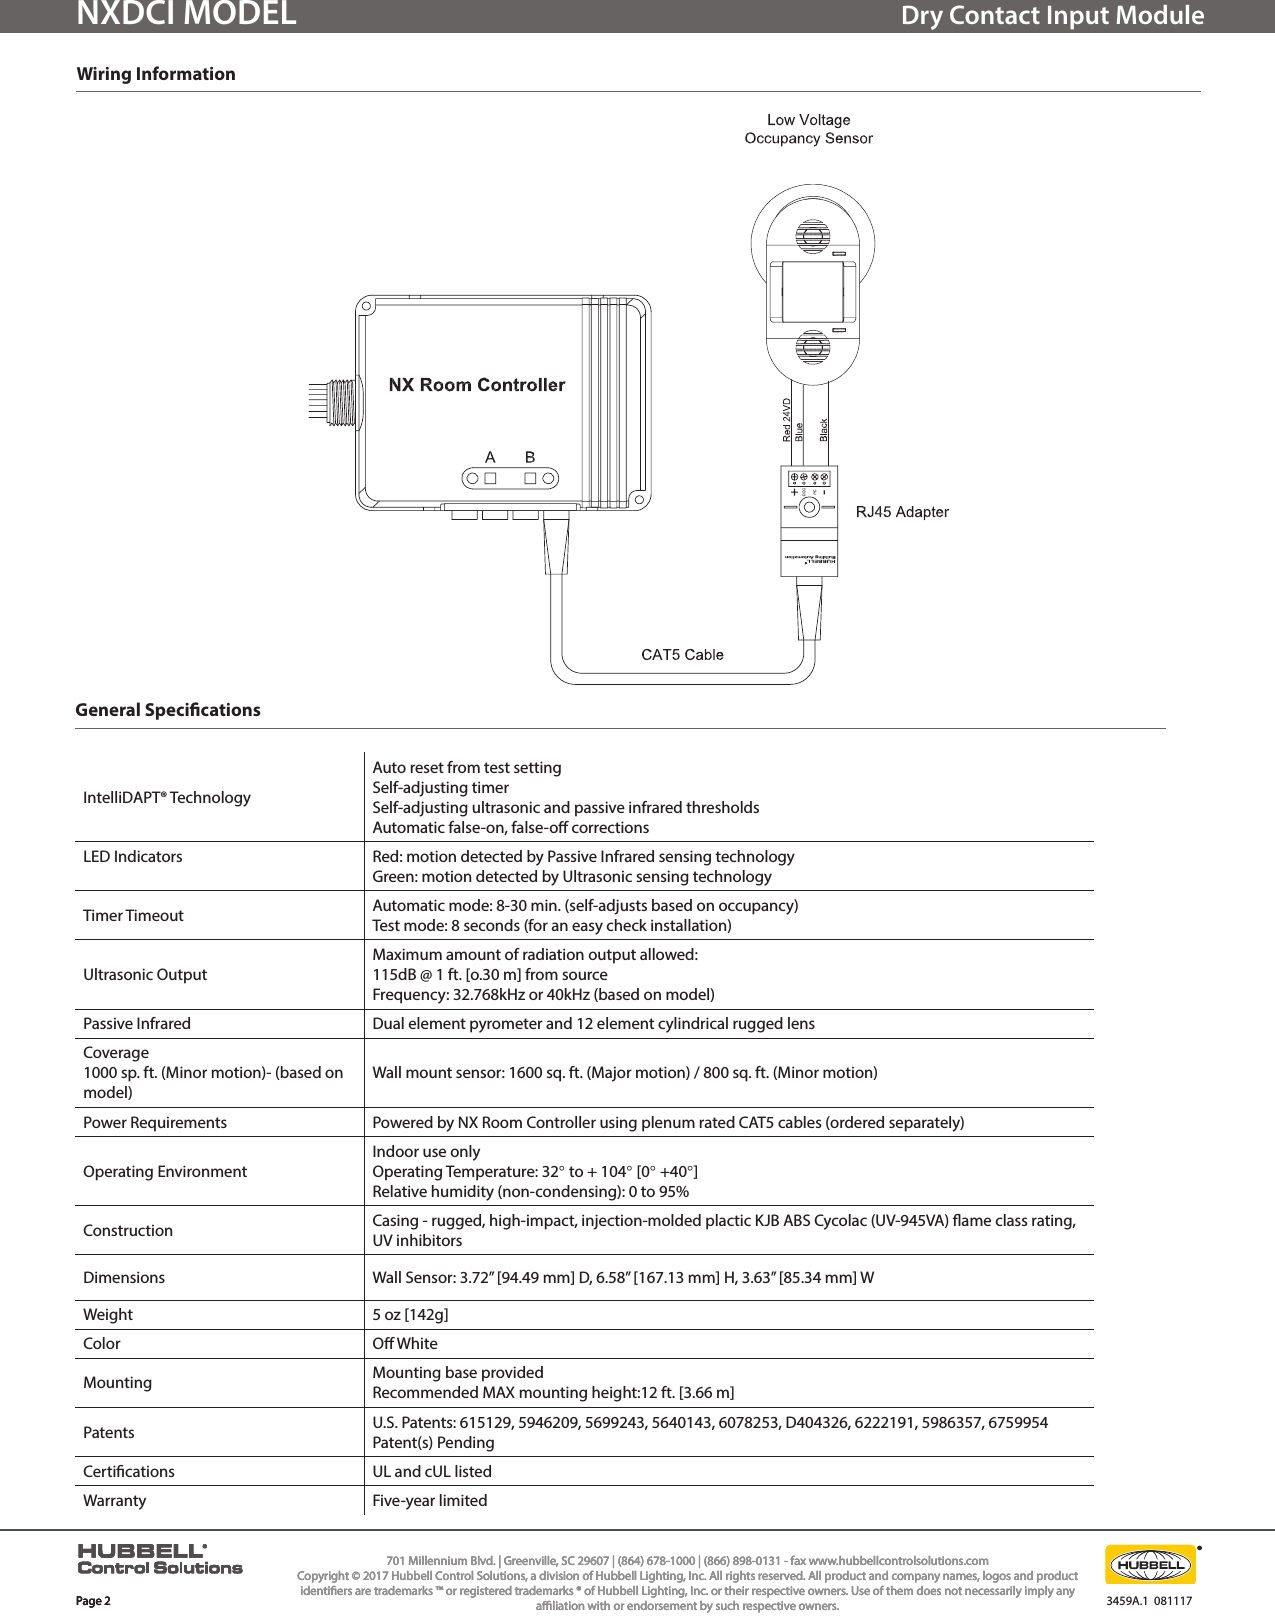 Page 2 of 2 - NX Wall Mount Occupancy Sensors Specification Sheet